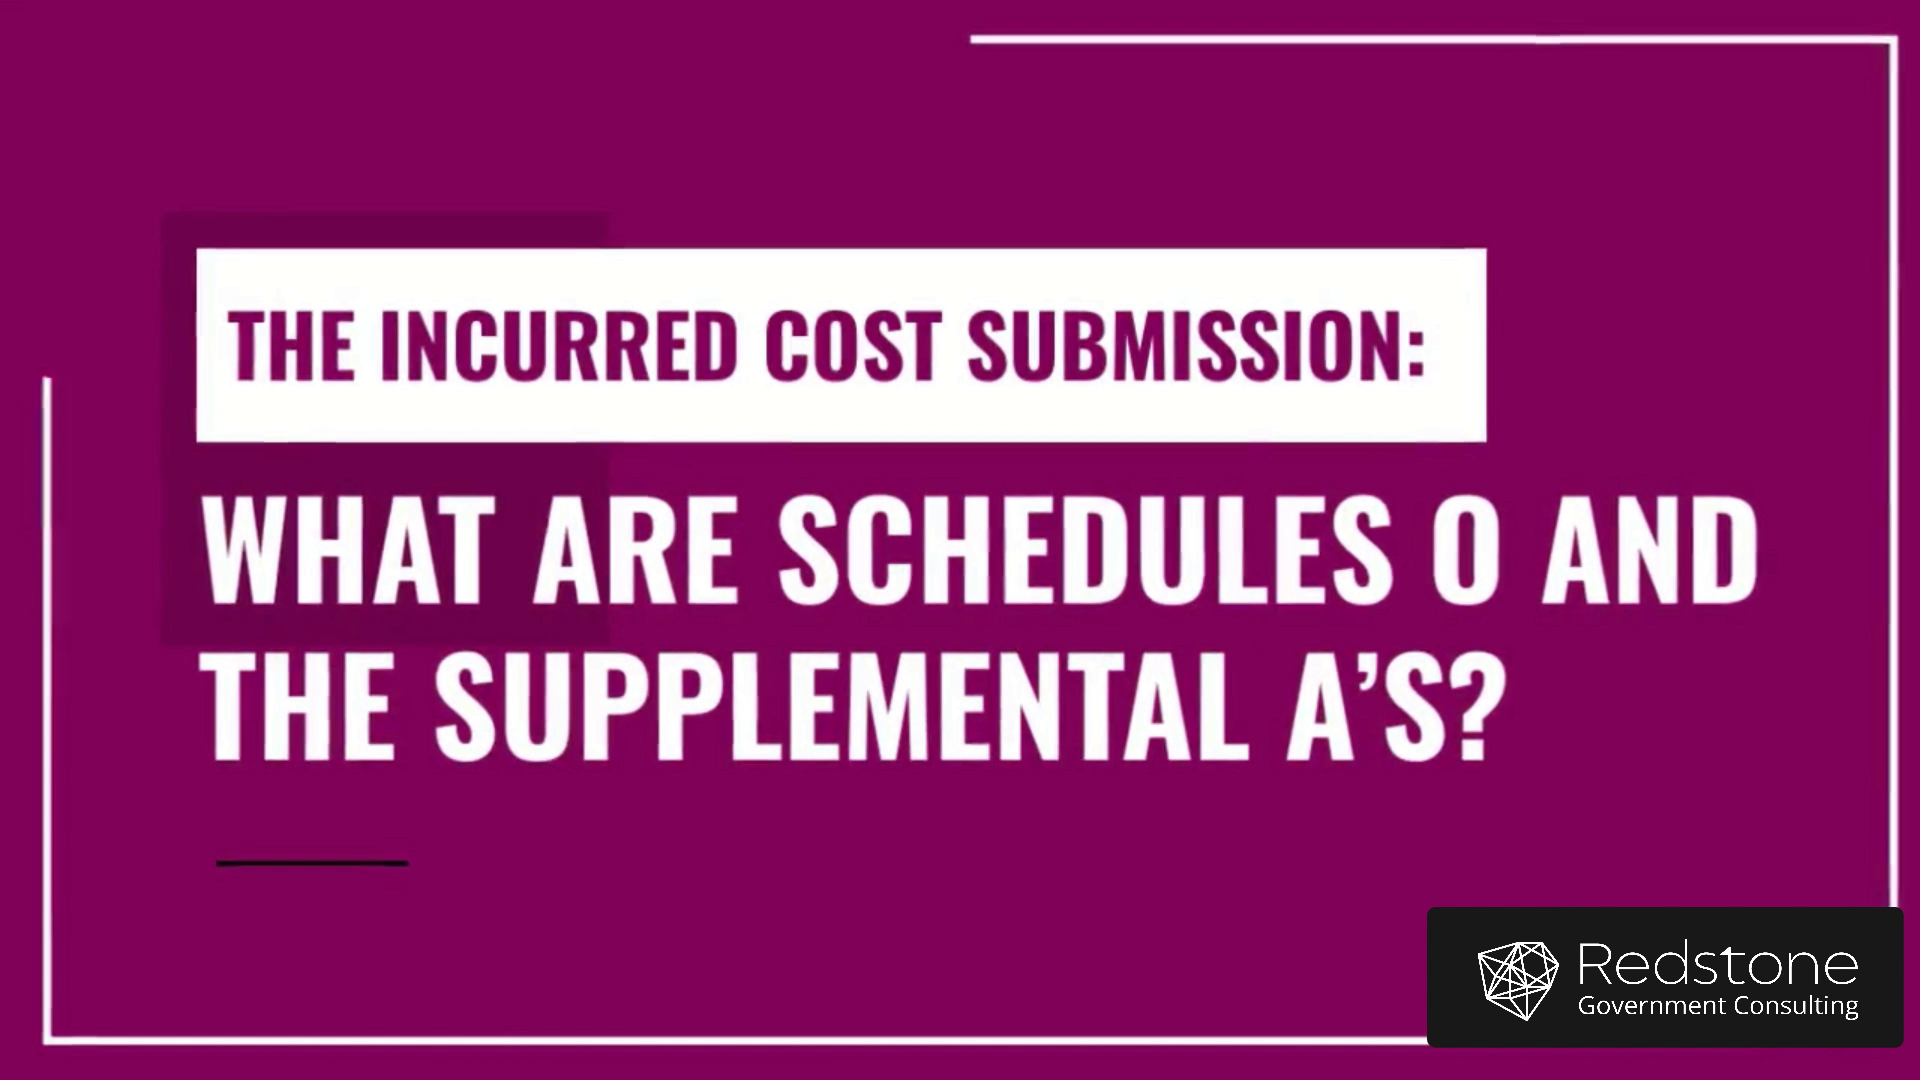 What are Schedules O and the Supplemental A’s in the Incurred Cost Submission? - Redstone gci